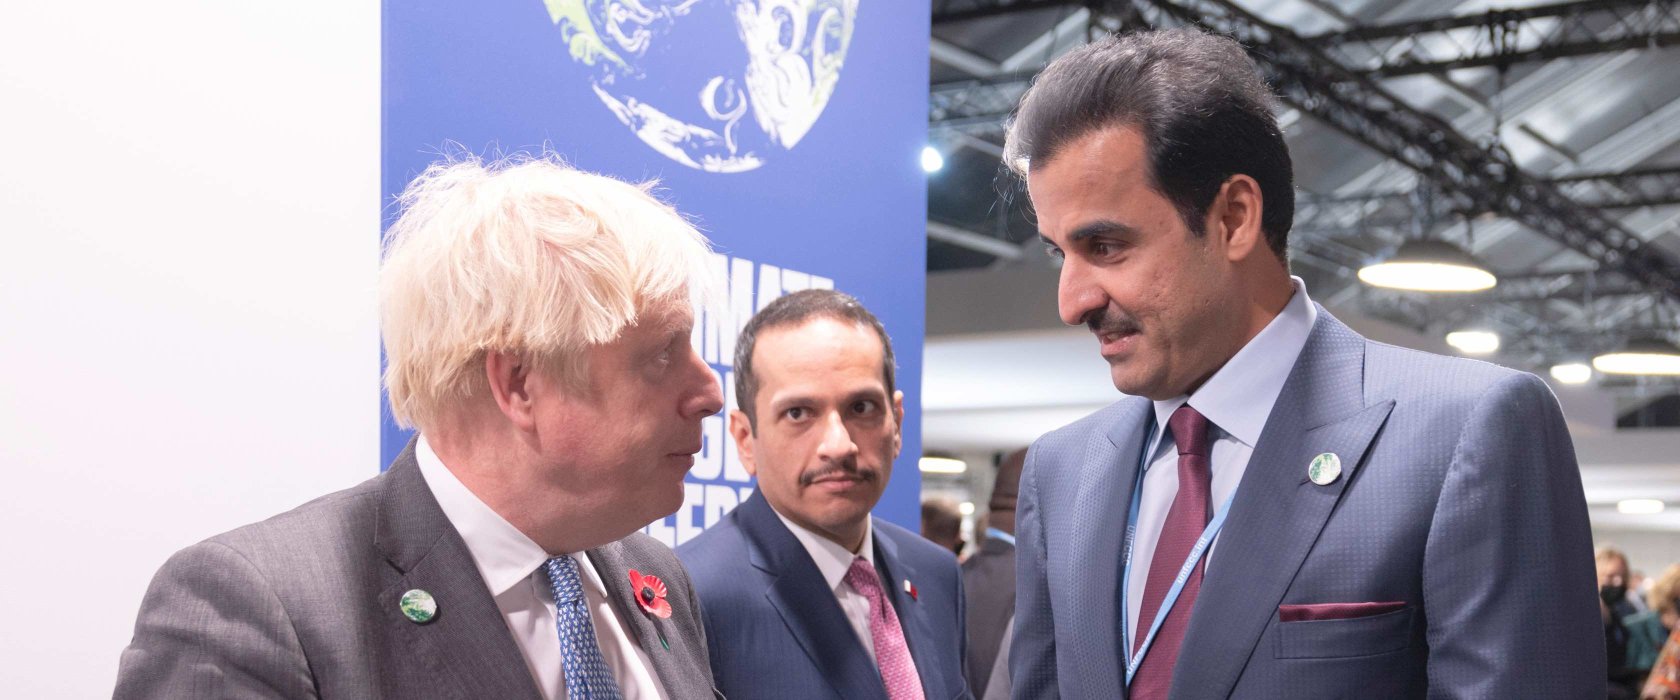 Qatar Foundation and Rolls-Royce sign strategic partnership to invest, develop, and scale-up climate-tech businesses in UK and Qatar